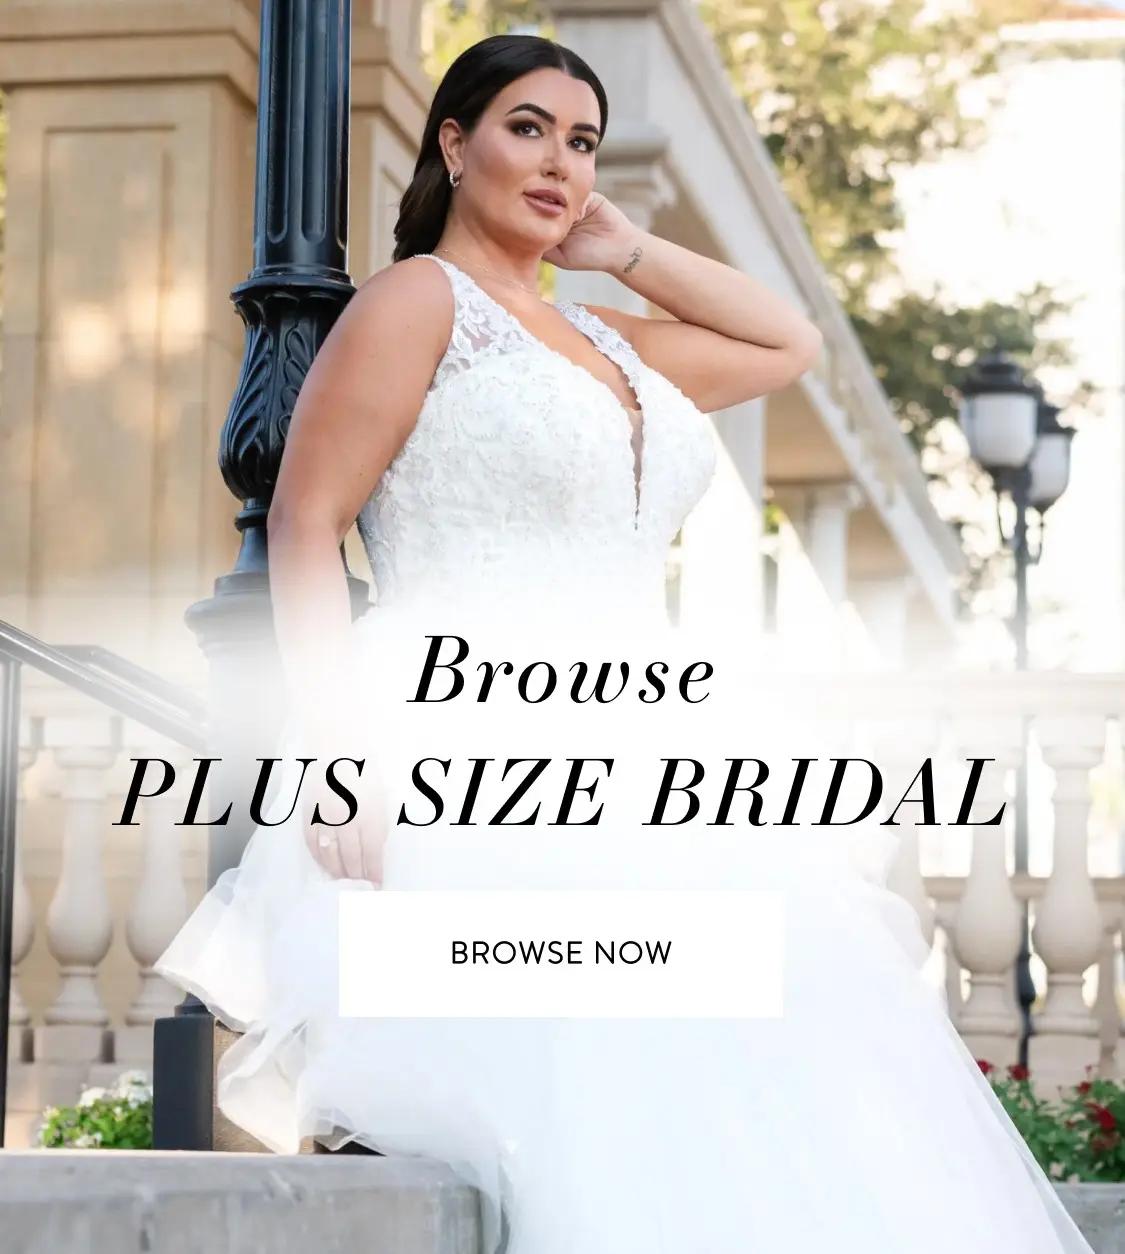 Mobile Browse Plus Size Bridal Banner